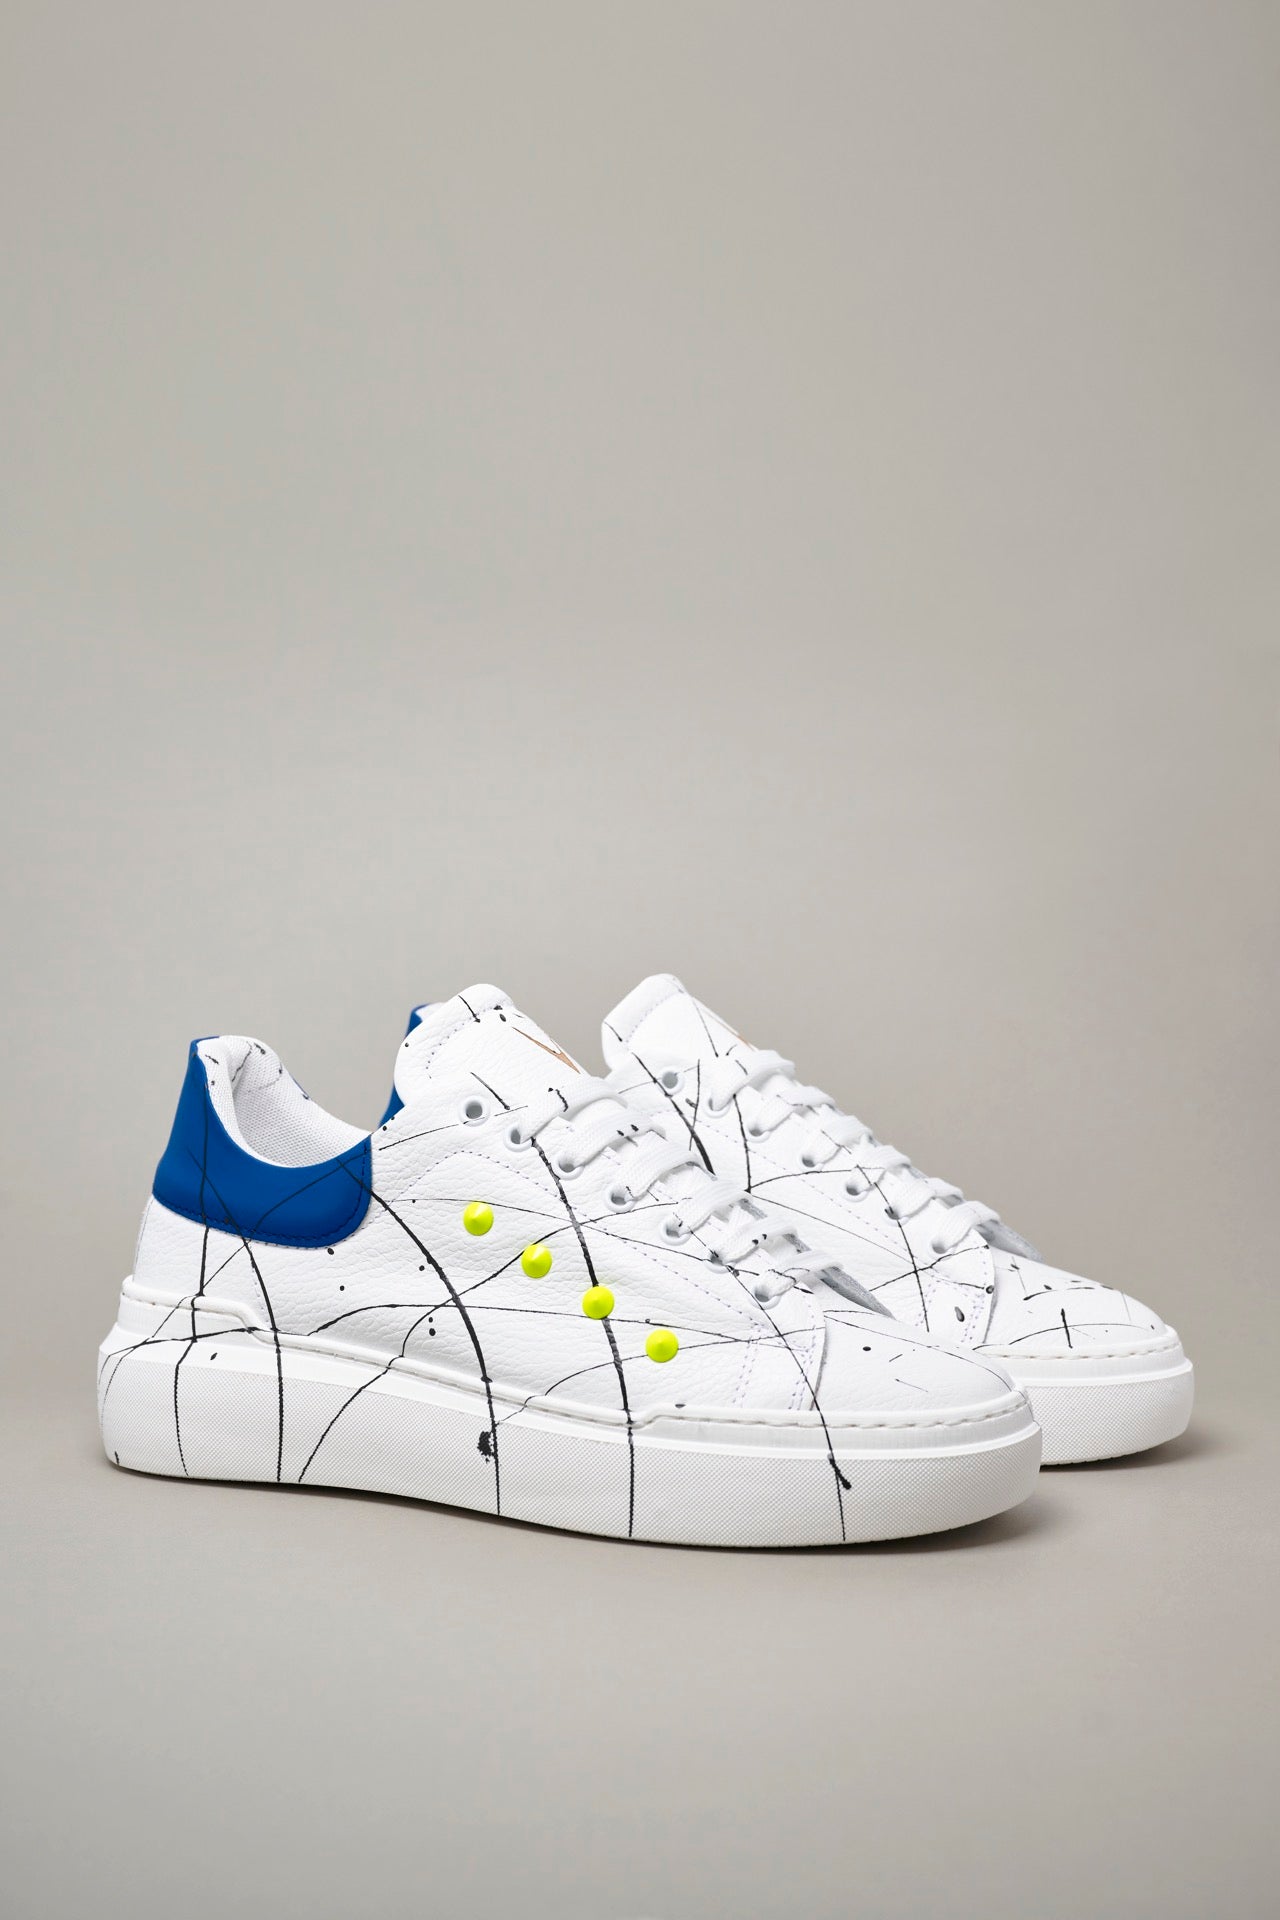 HAMMER - High sole sneakers in textured leather with Royal Blue back with Fluo Yellow studs and paint splashes